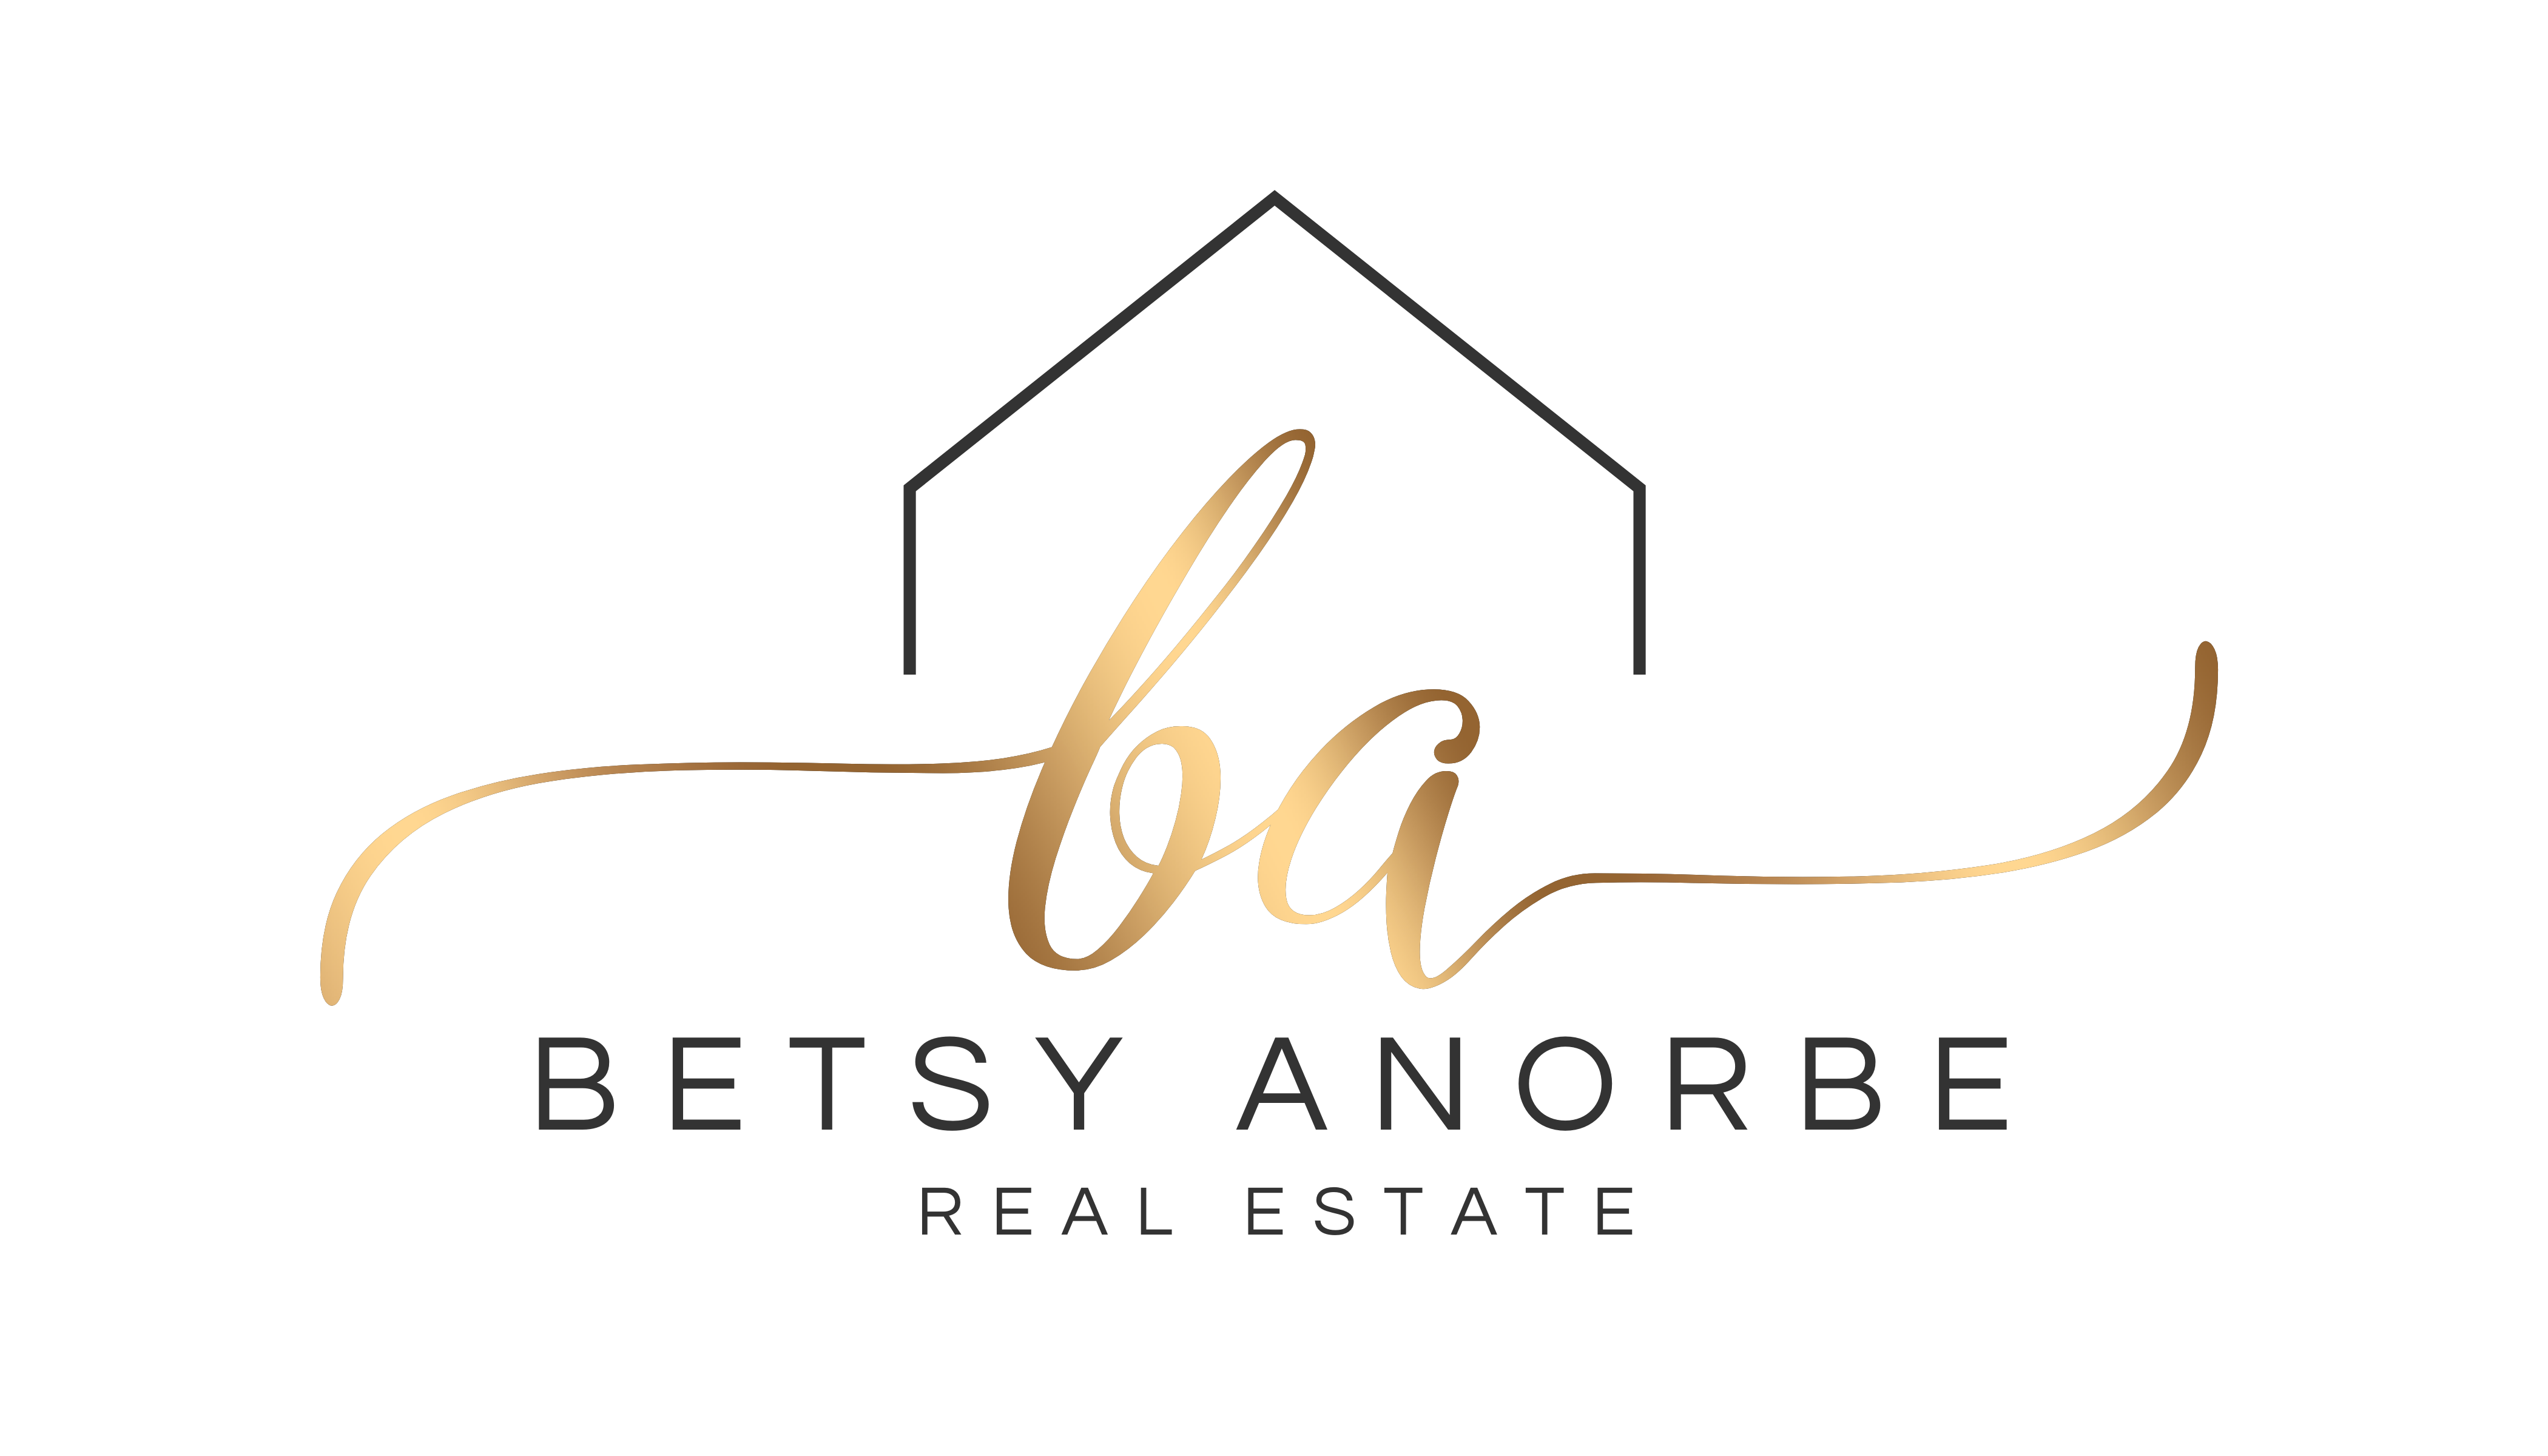 Betsy Anorbe Real Estate